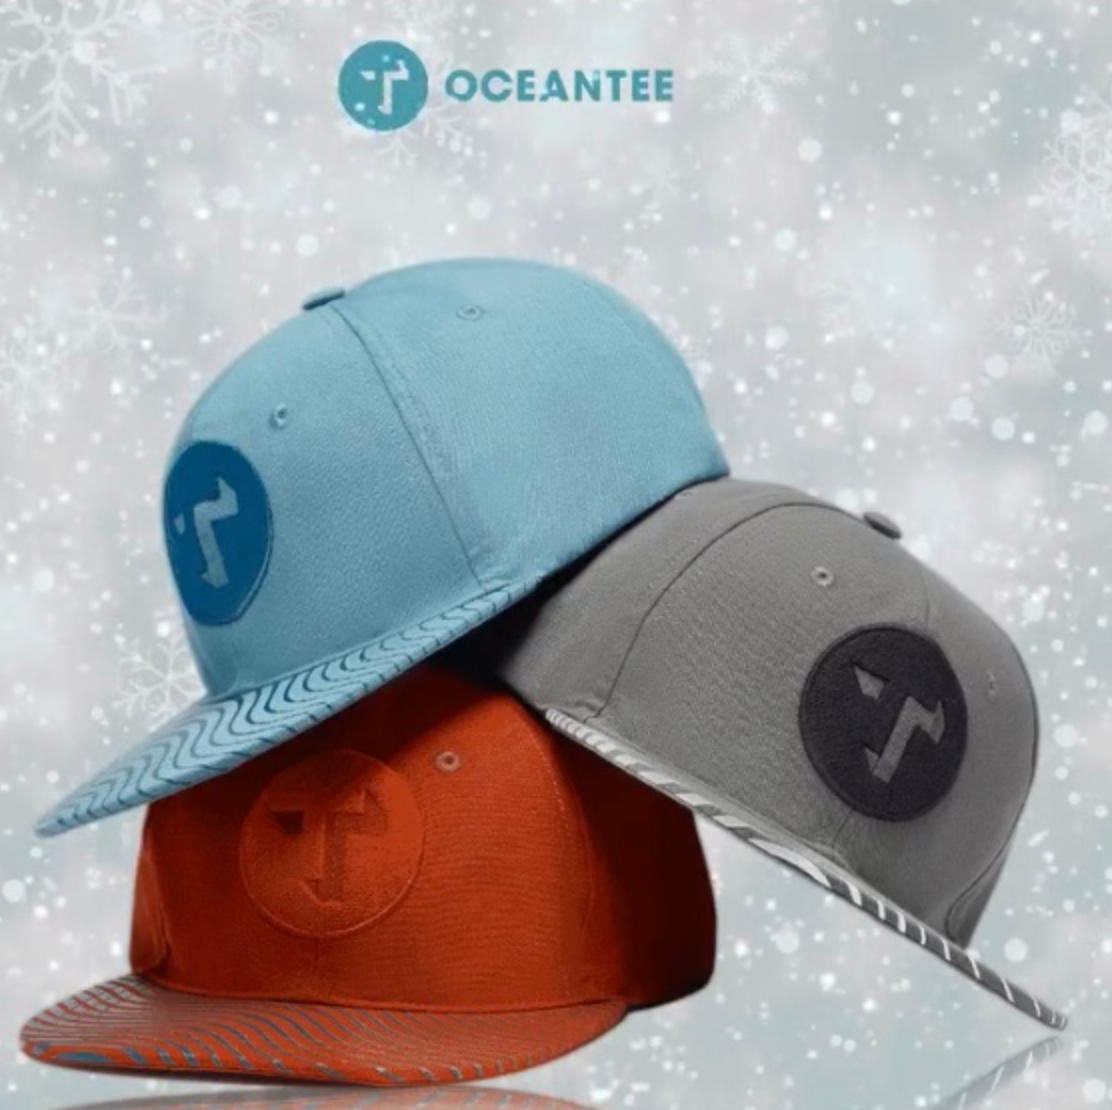 Oceantee 100% Recycled Caps  - Flat Brim - 3 Colours Available